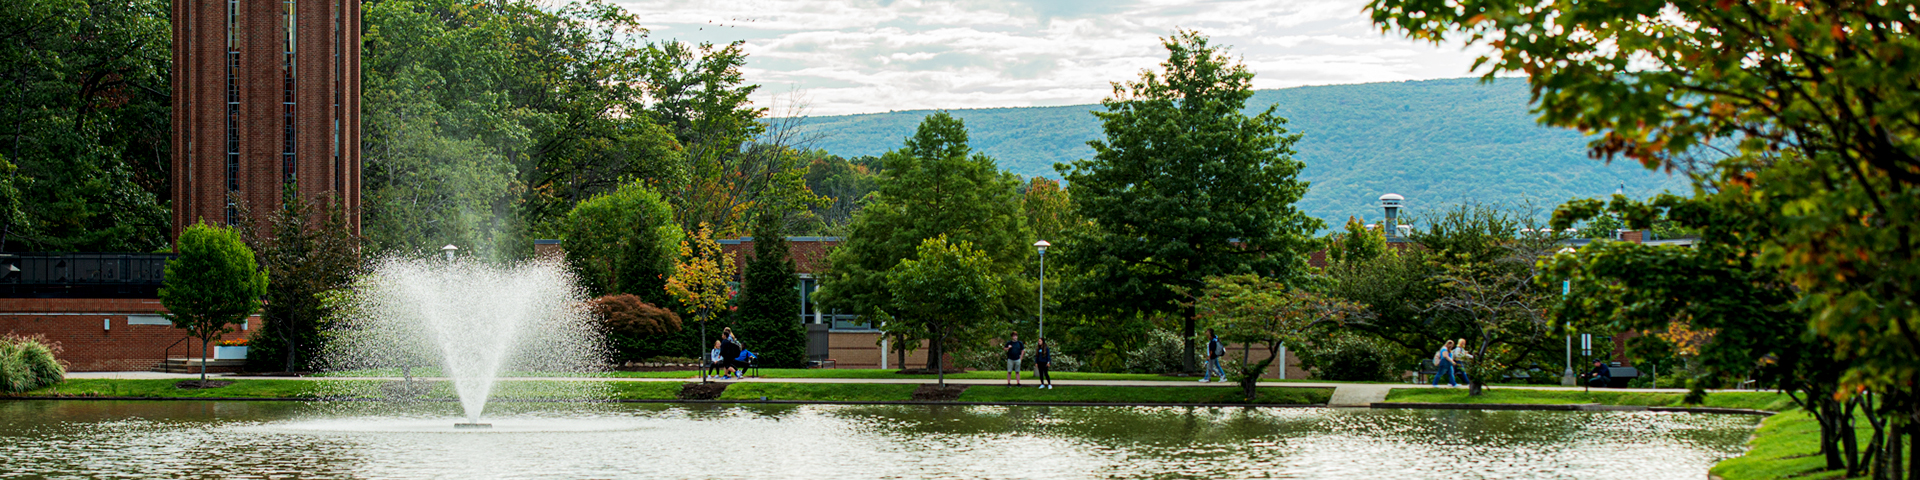 The Penn State Altoona reflecting pond and fountain